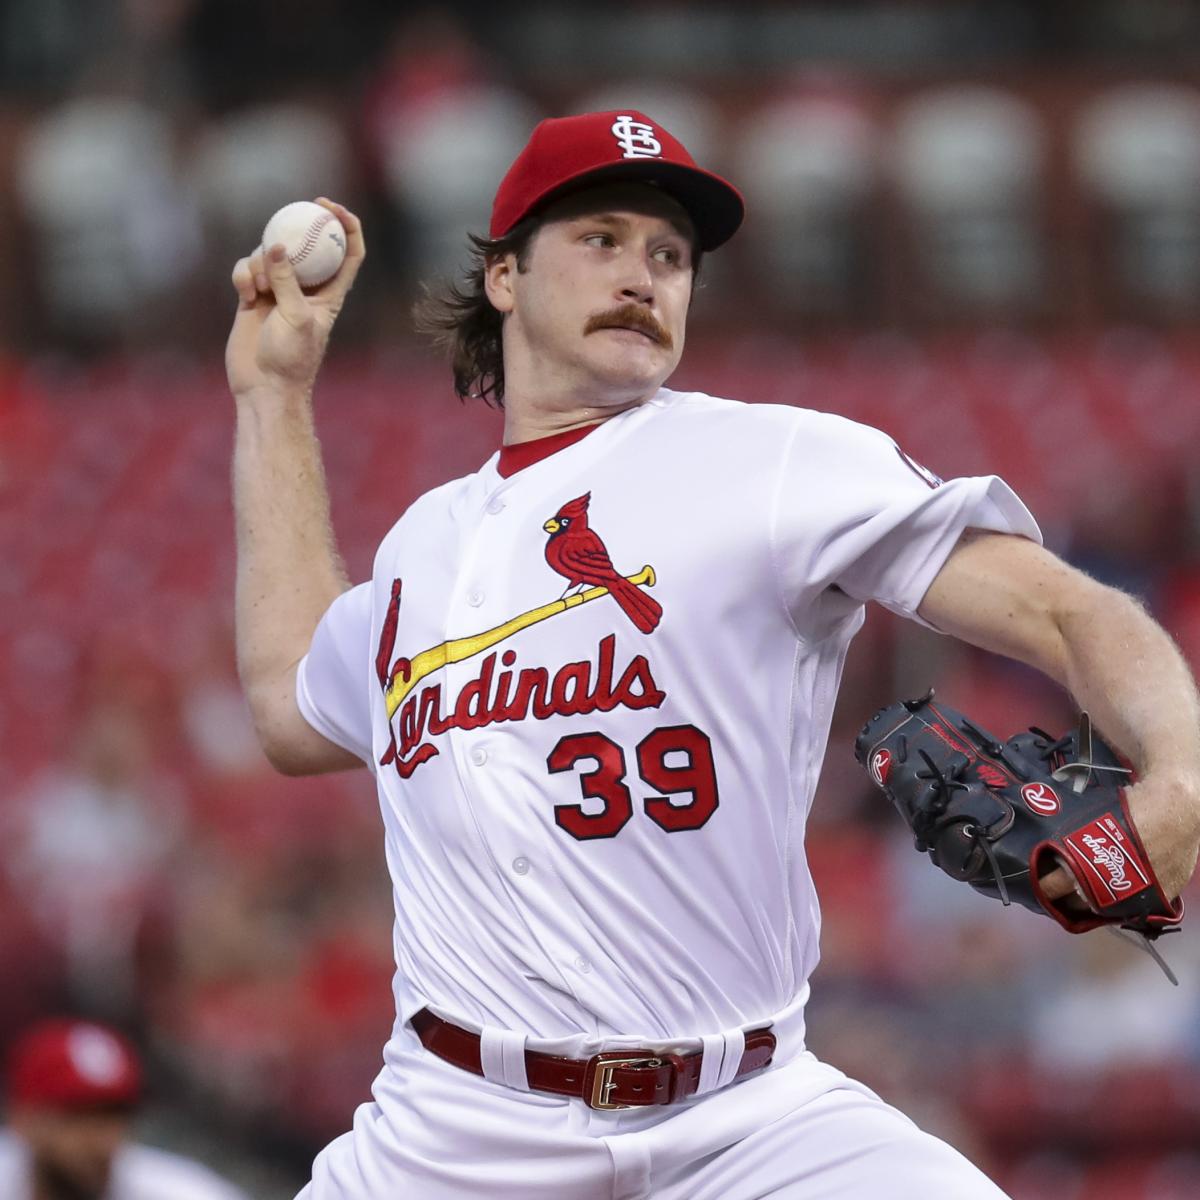 No MLB Team Wanted Miles Mikolas for 3 Years, Now He's an Ace